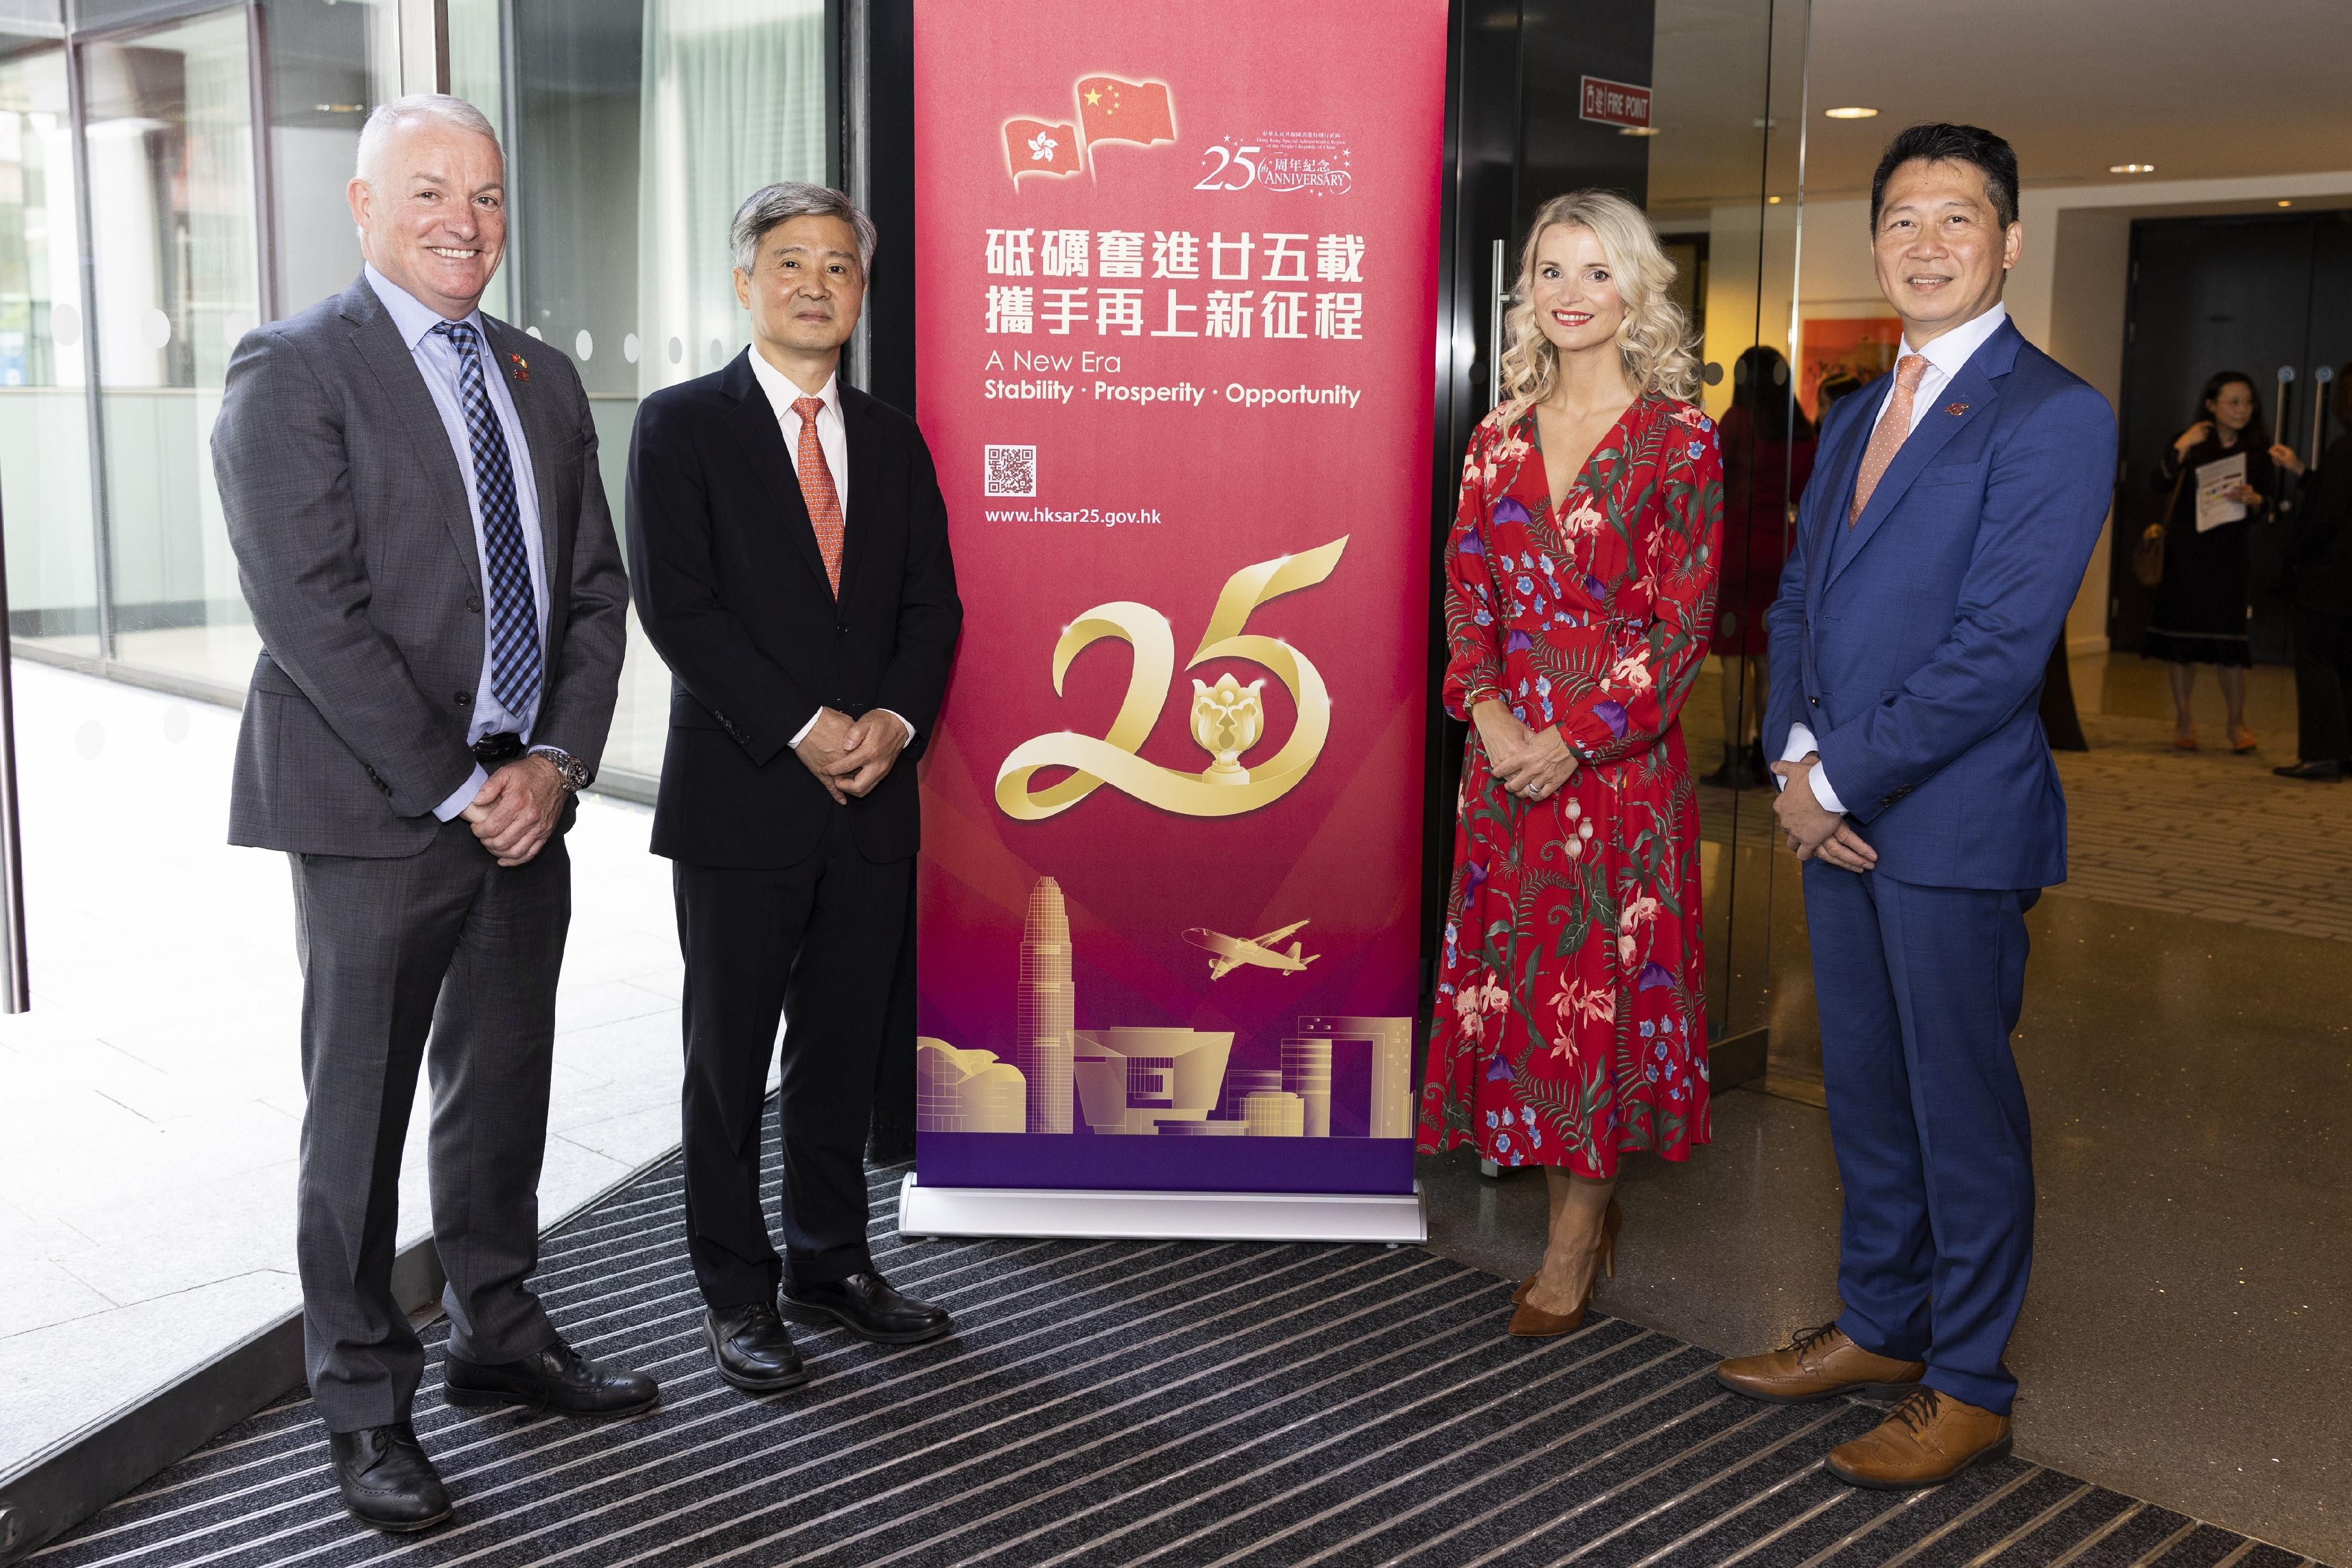 The Special Representative for Hong Kong Economic and Trade Affairs to the European Union, Mr Eddie Cheung (first right), joins a photo with the Chinese Ambassador to Ireland, Mr He Xiangdong (second left), and the co-organisers of the business luncheon in Dublin, Ireland, on June 15 (Dublin time) to celebrate the 25th anniversary of the establishment of the Hong Kong Special Administrative Region including the Chair of the Ireland Hong Kong Business Forum, Mr Brendan Foster (first left), and the Deputy Vice President of the Dublin Chamber of Commerce, Ms Siobhan O'Shea (second right).